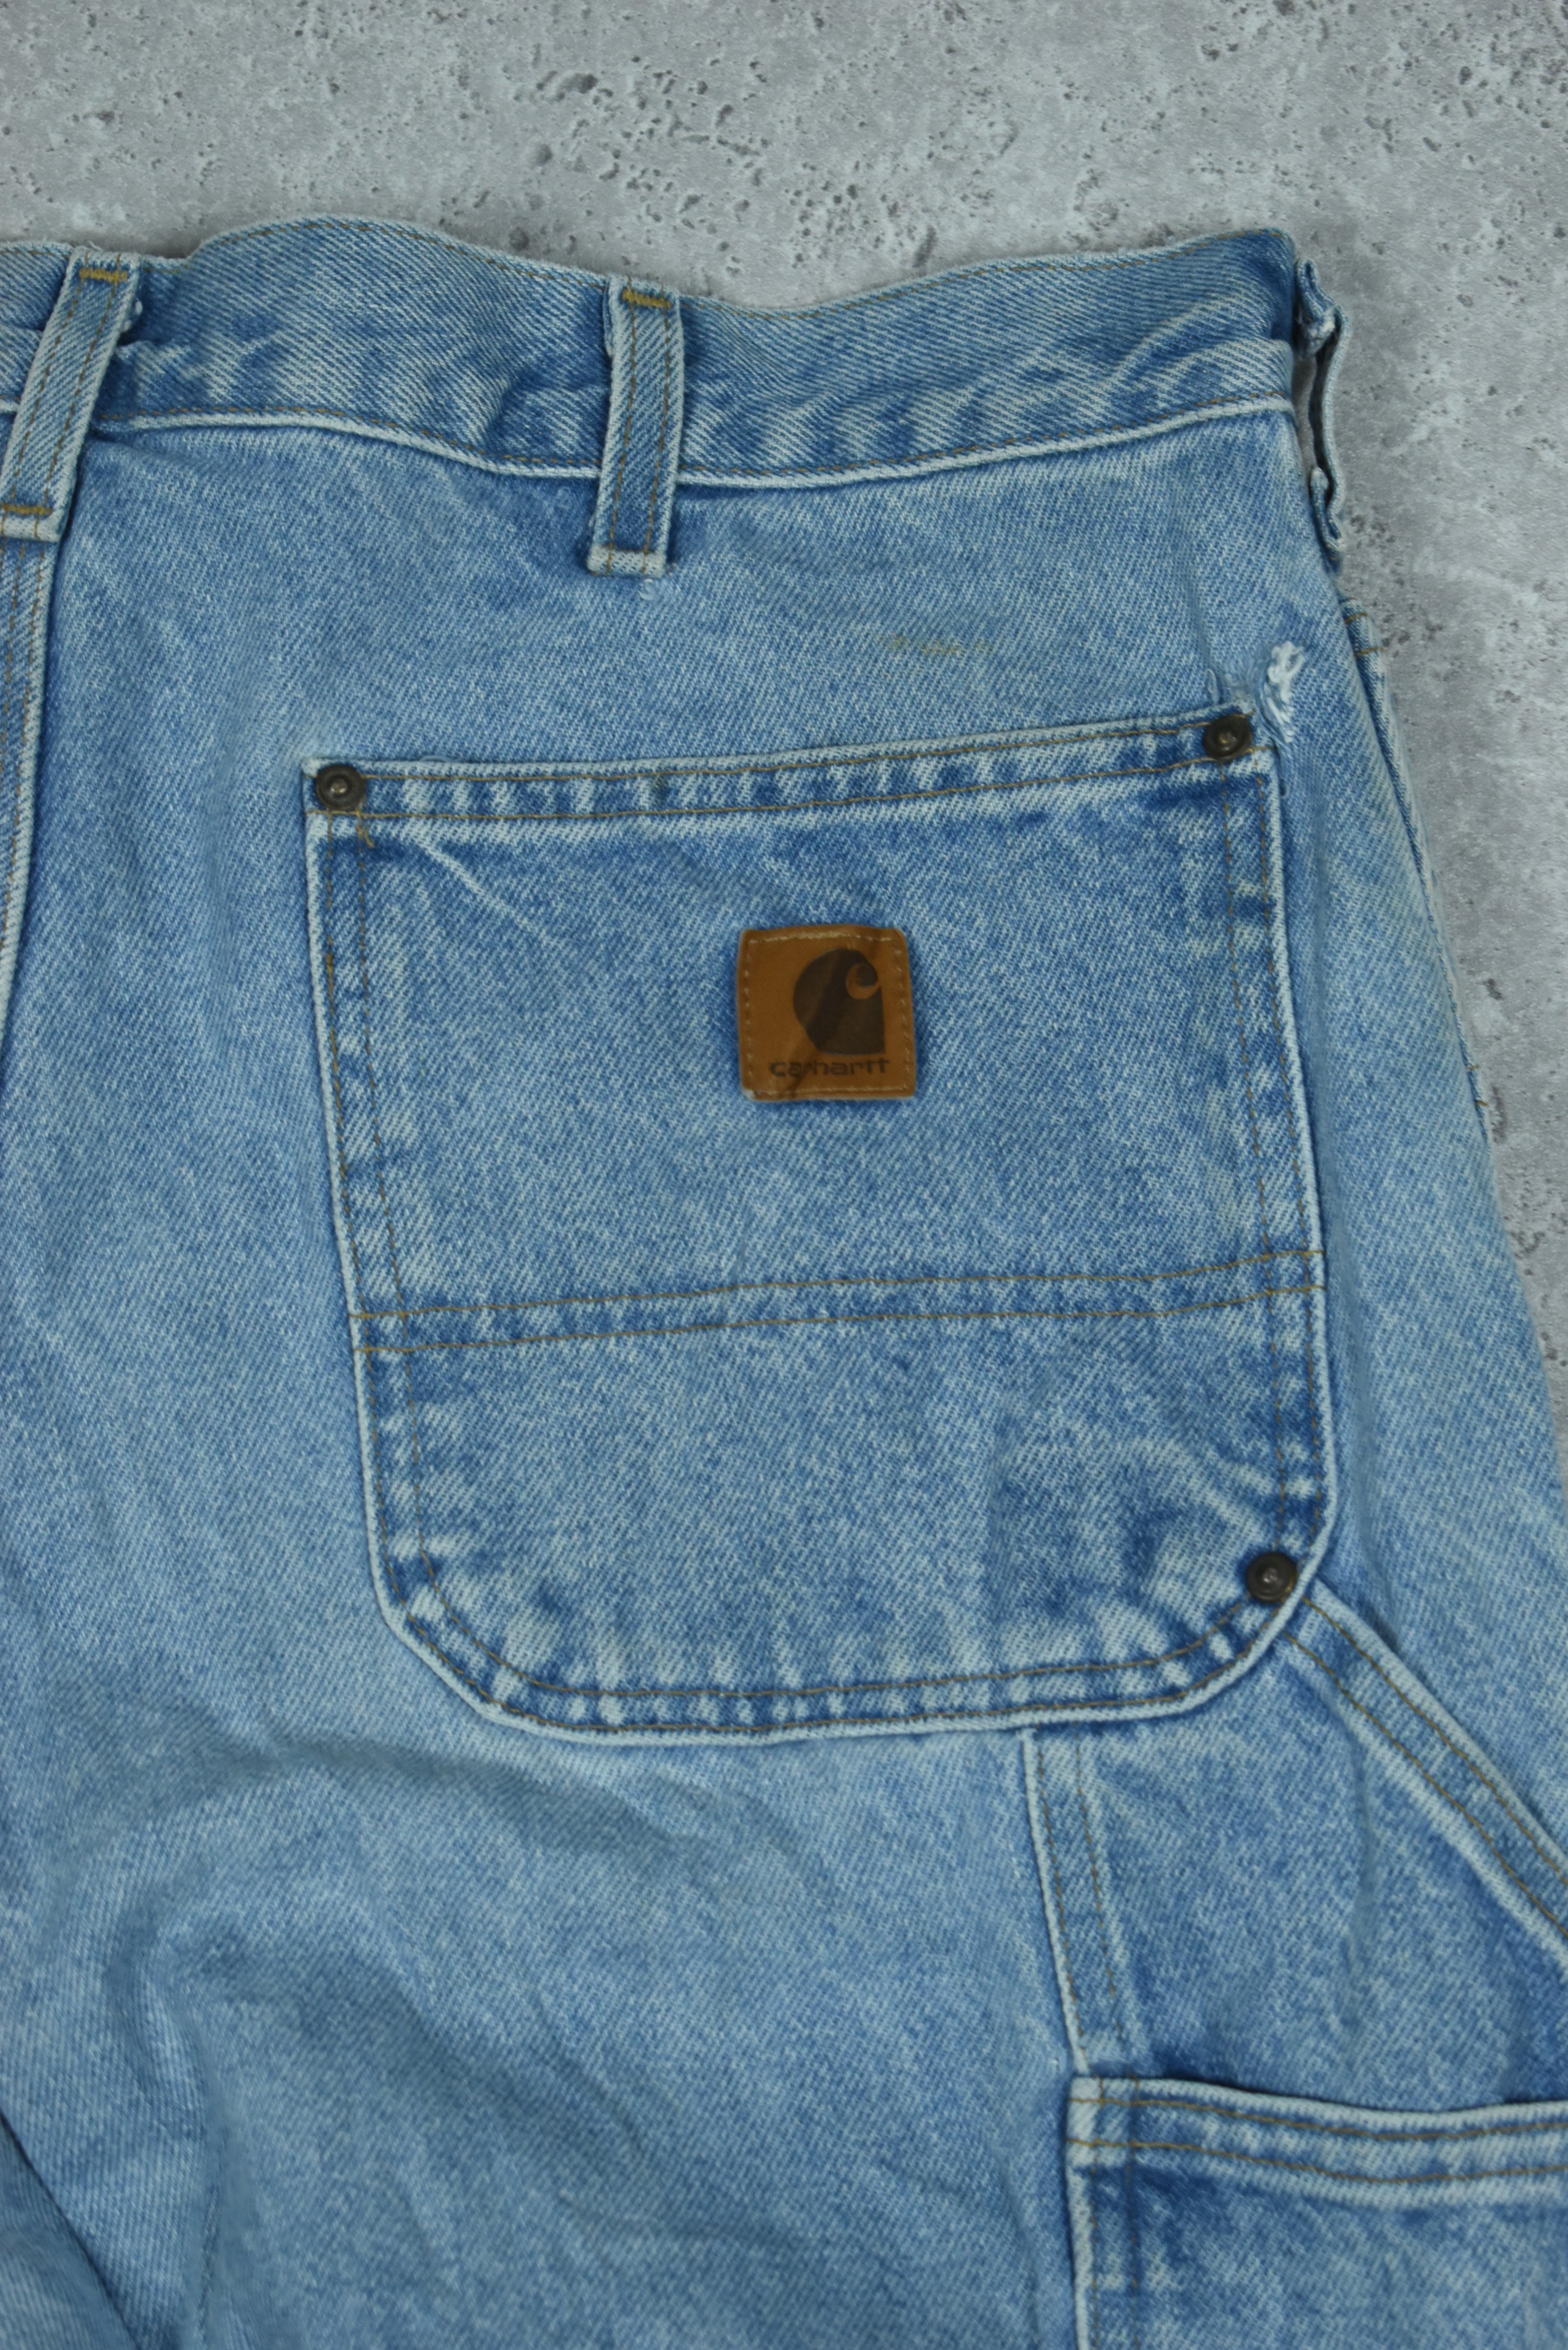 Vintage Carhartt Double Knee Dungarees 36x32